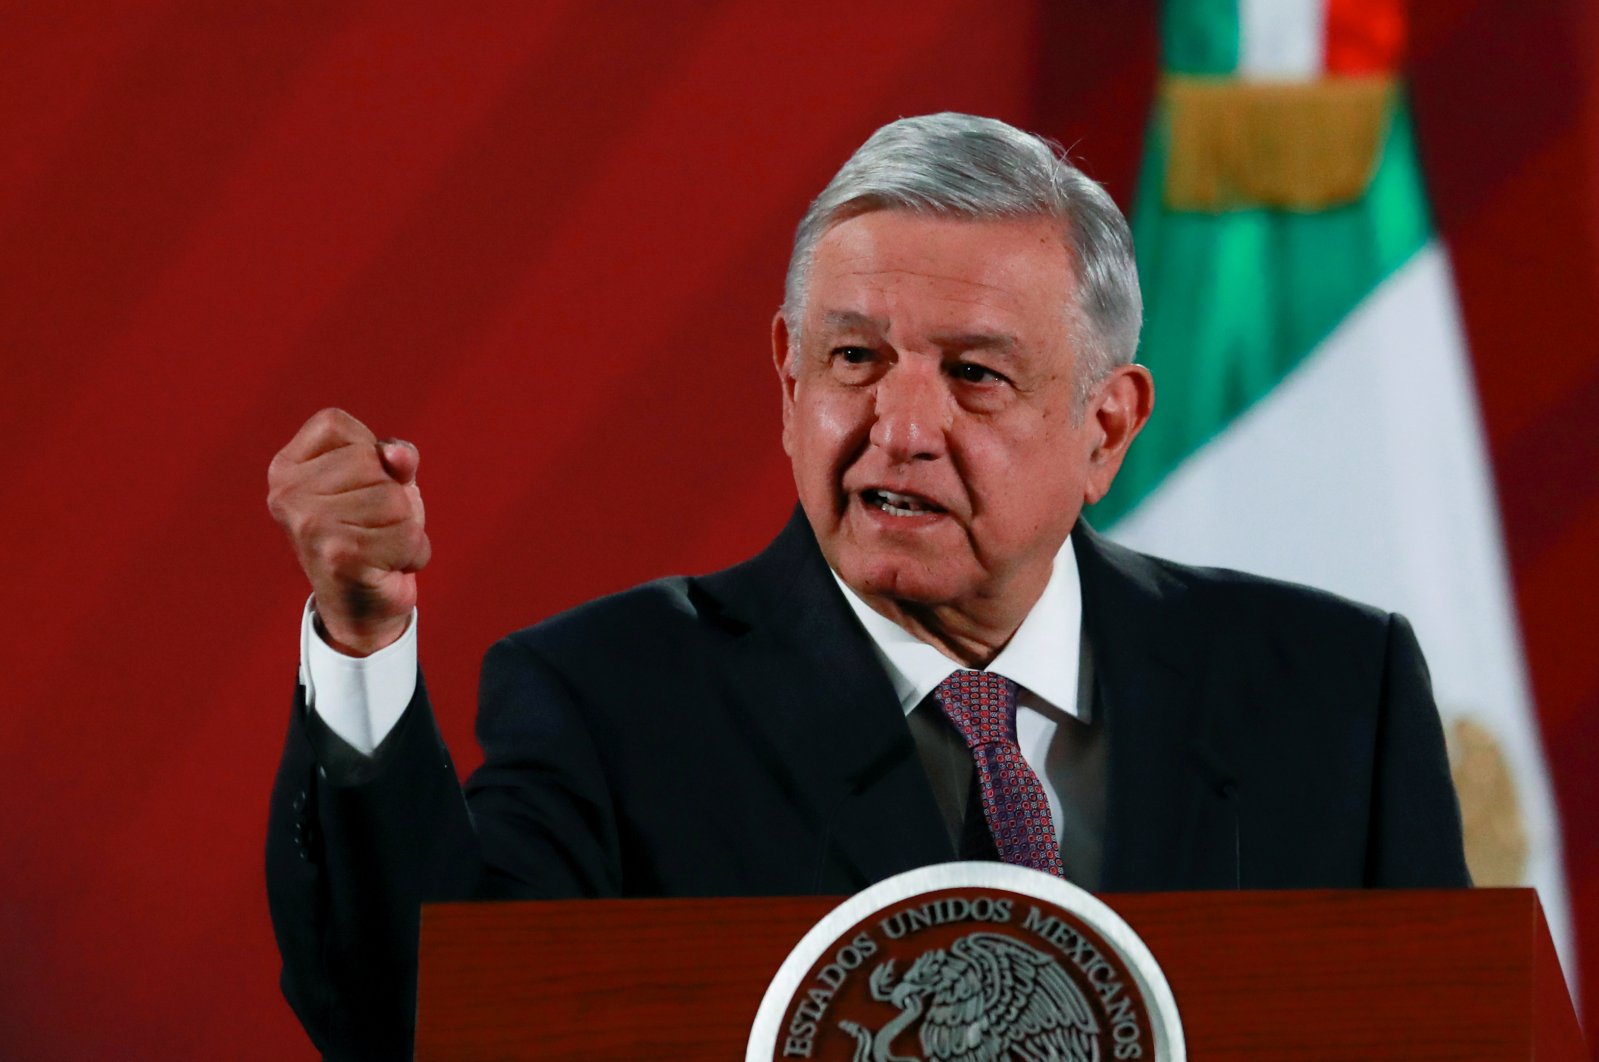 Mexican President Andres Manuel Lopez Obrador speaks during a news conference at the National Palace in Mexico City, Mexico, March 9, 2020. (Reuters Photo)